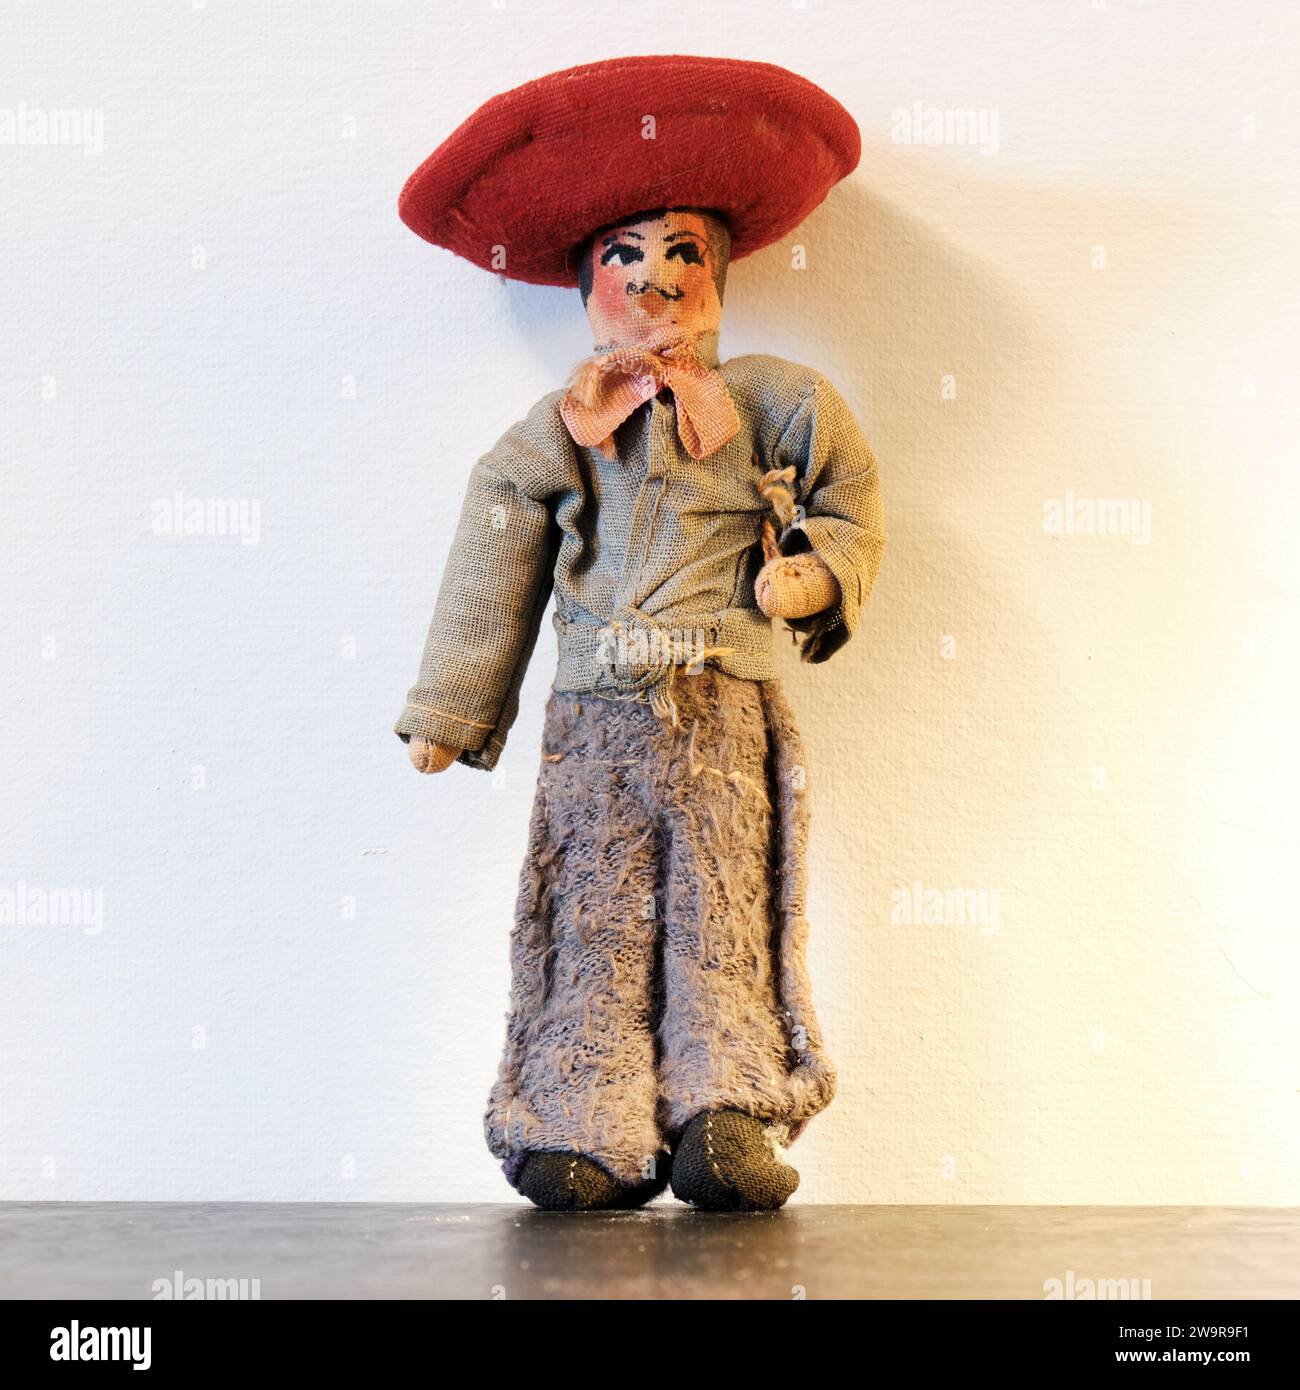 Vintage collectible dolls, Man with mustache and sombrero Stock Photo